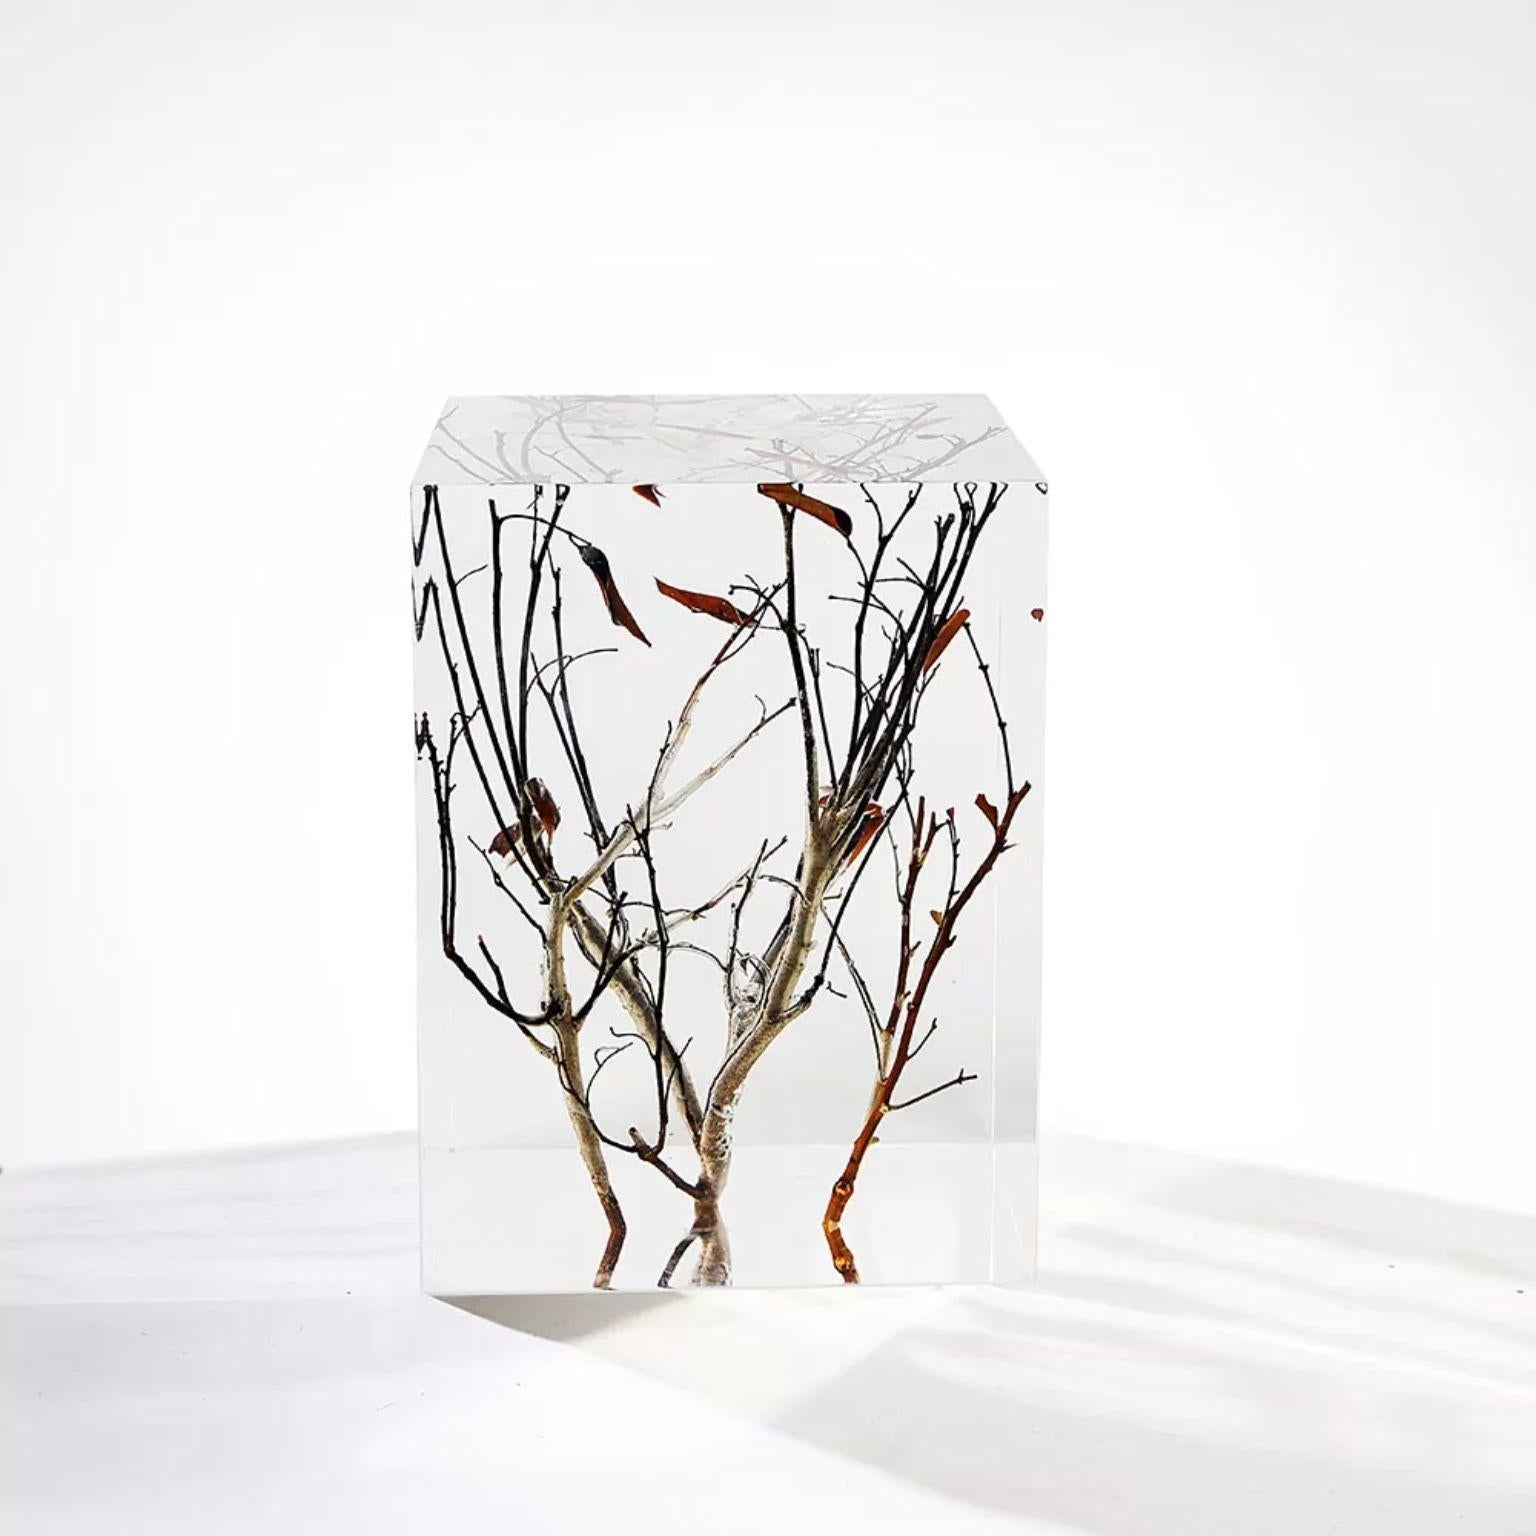 Cubic Crystal Pedestal by Dainte
Dimensions: D 28 x W 29 x H 38 cm.
Materials: Crystal. 

This clear crystal display pedestal is finely crafted and visually stunning. Made of crystal mixed with acrylic and natural wooden branches, the unique